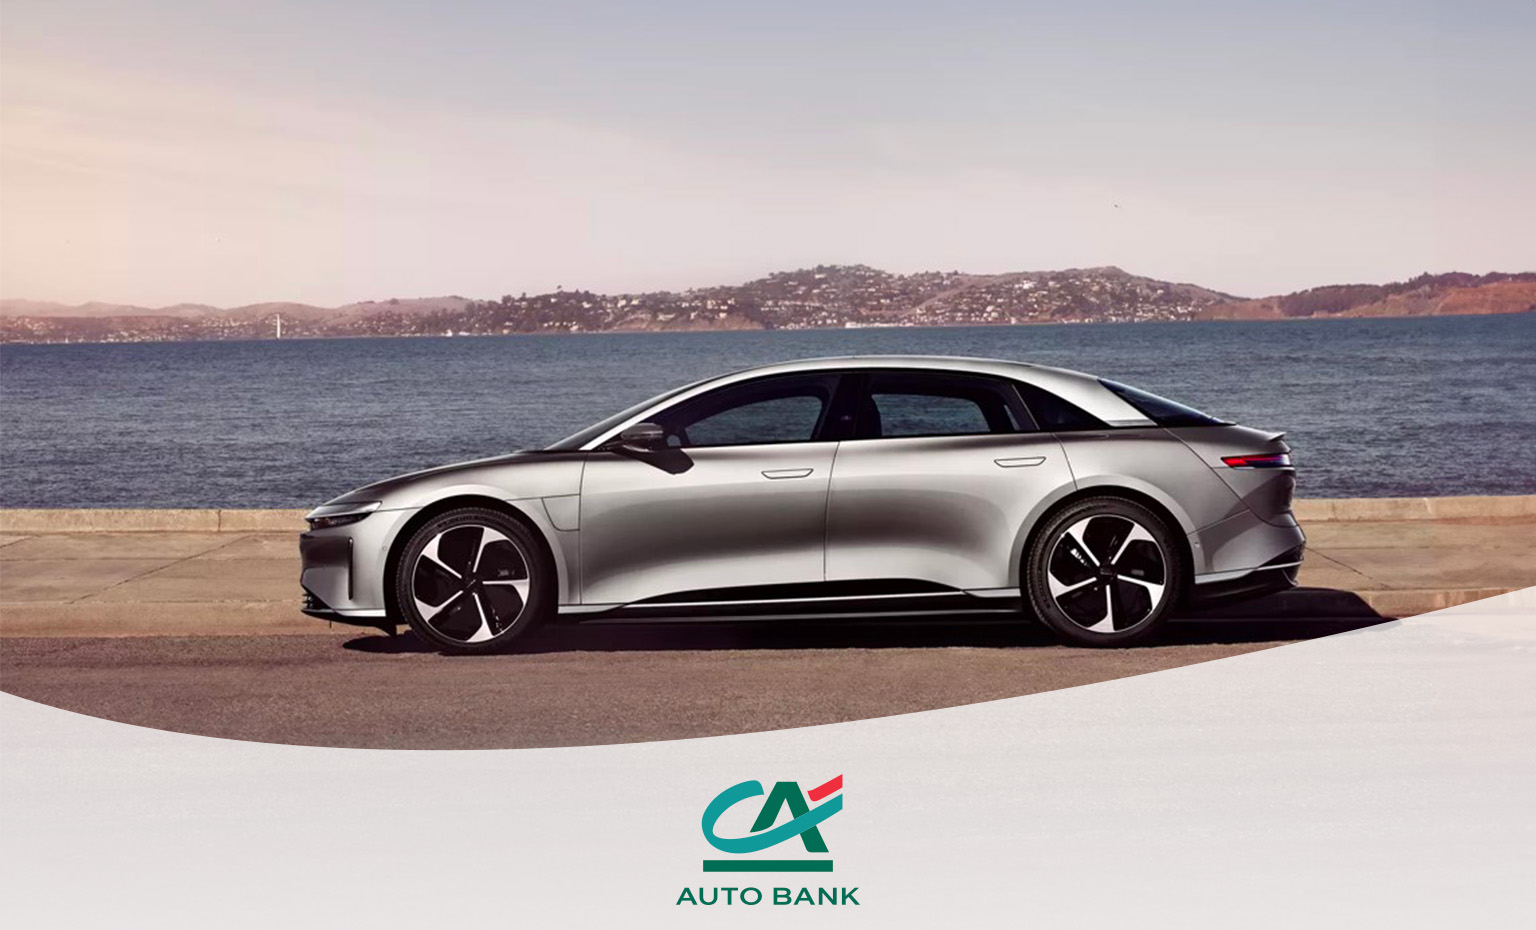 Luxury e-mobility: CA Auto Bank enters into partnership with Lucid - CA  Auto Bank - Corporate Site